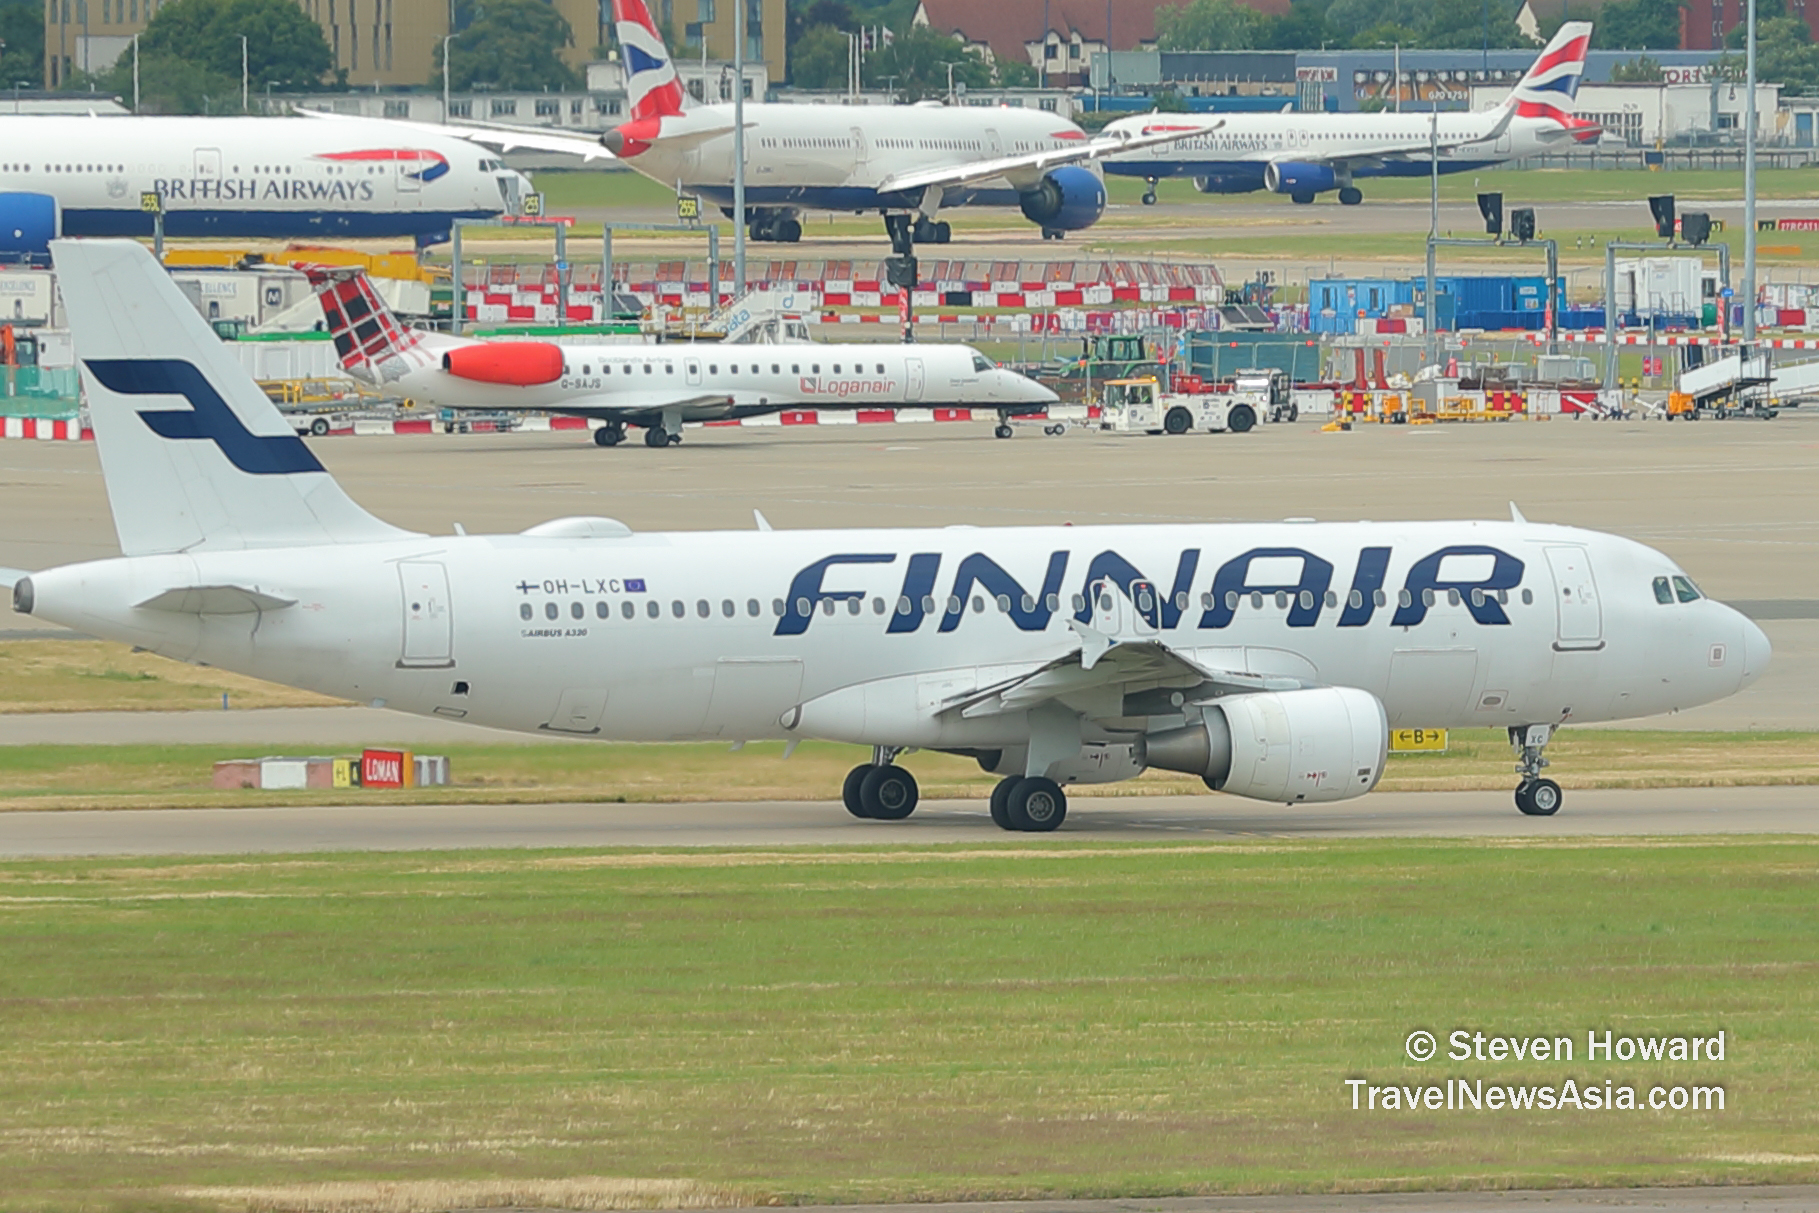 Finnair Airbus A320 reg: OH-LXC. Picture by Steven Howard of TravelNewsAsia.com Click to enlarge.